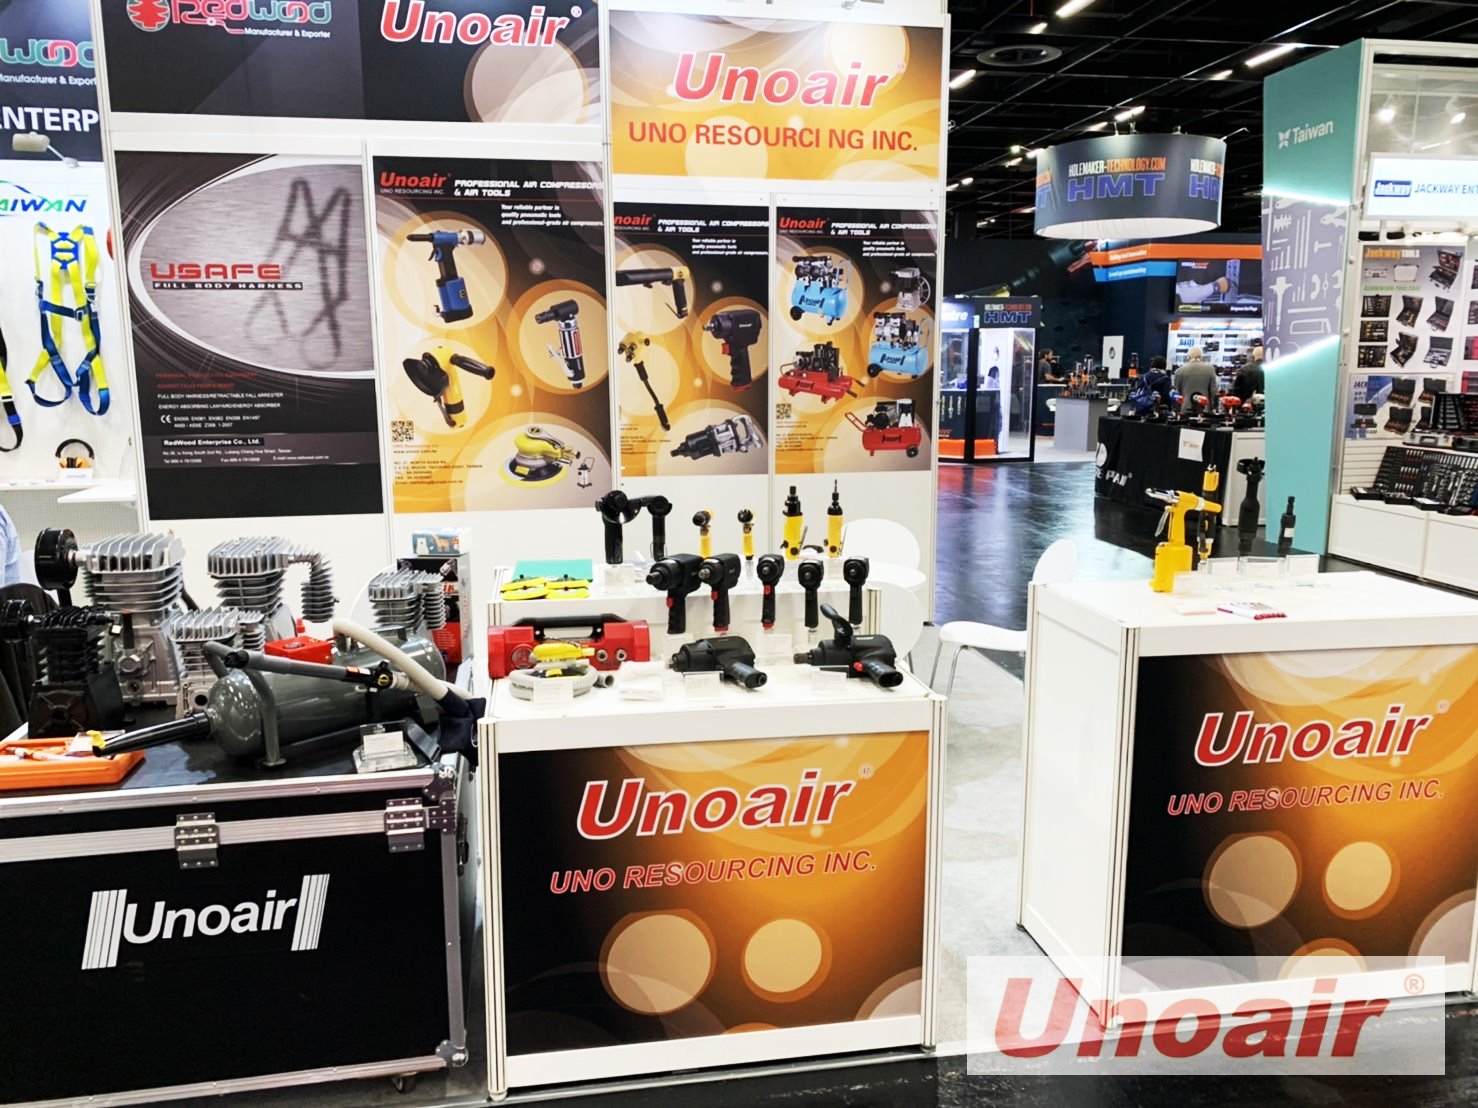 UNOAIR Weekly Update 09/30/2022 Thank you for those who visited our booth at EISENWARENMESSE as well as those who could not attend the show